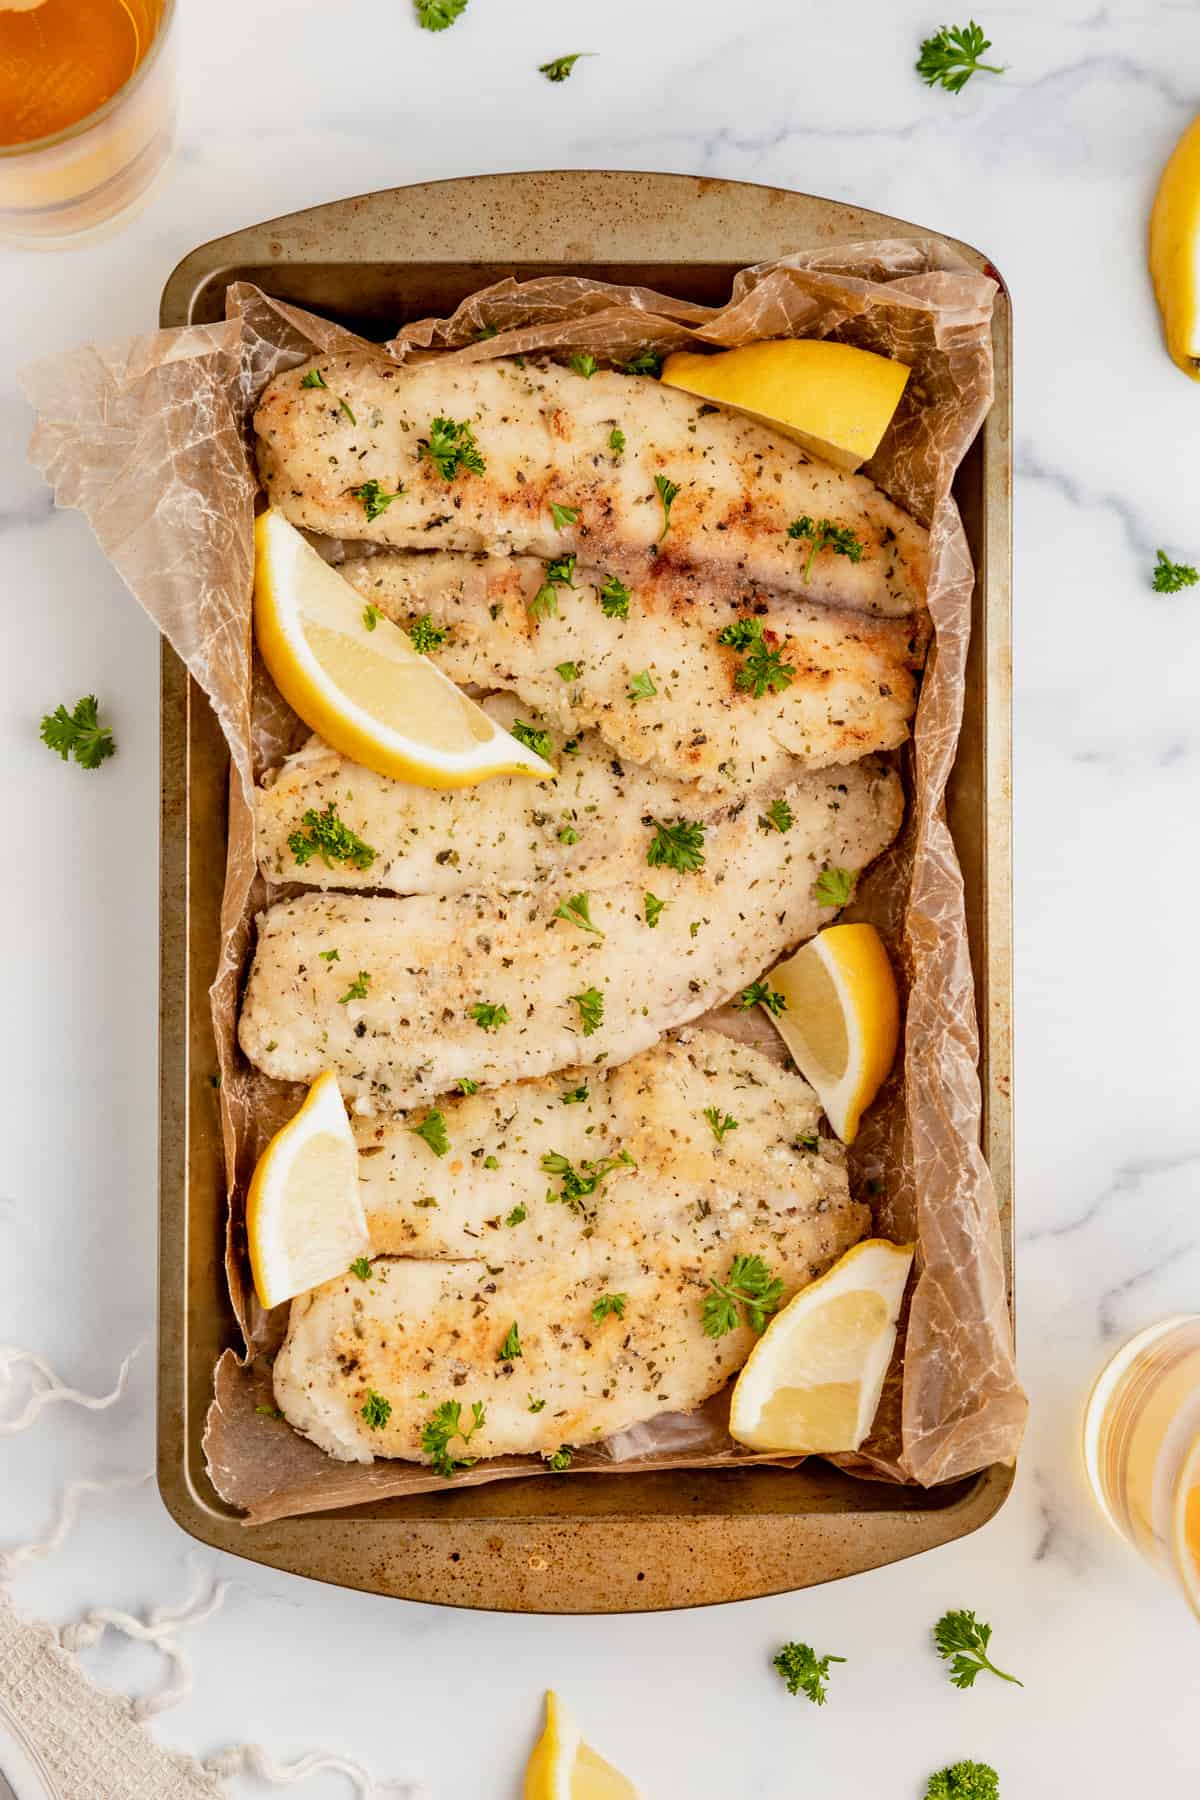 Pan fried fish in a baking dish with fresh herbs and lemon wedges.